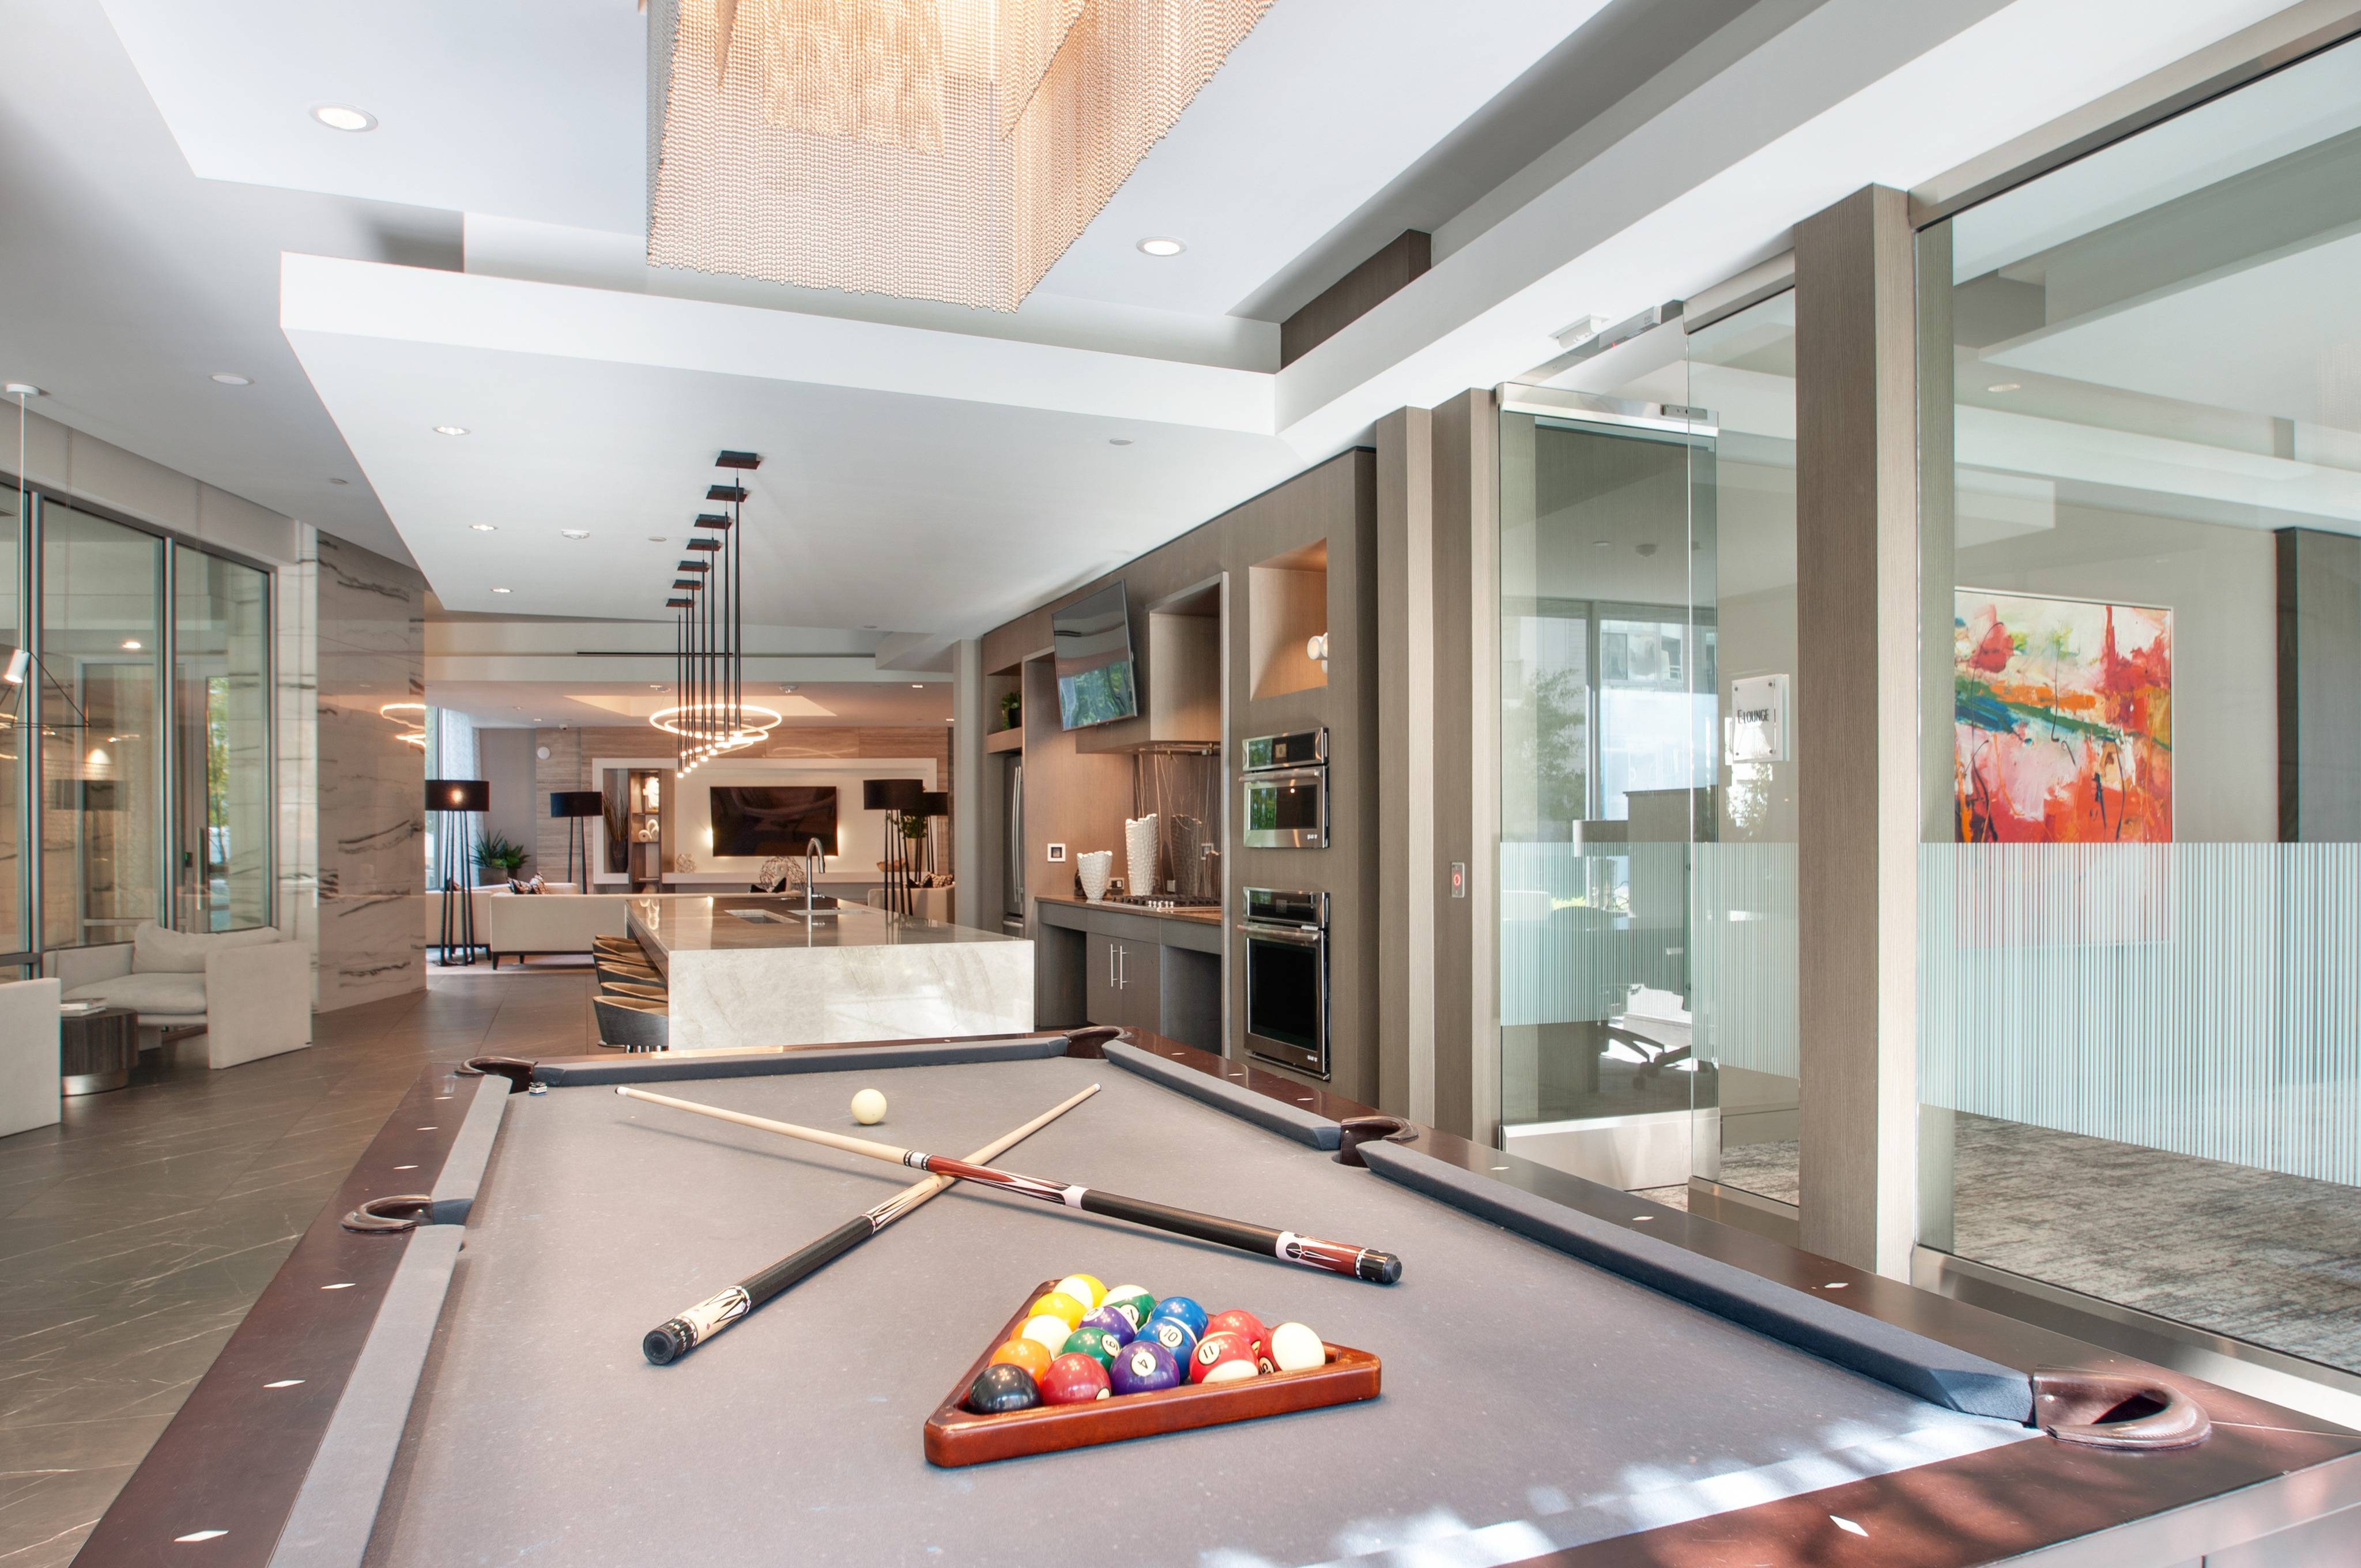 Clubhouse Pool Table